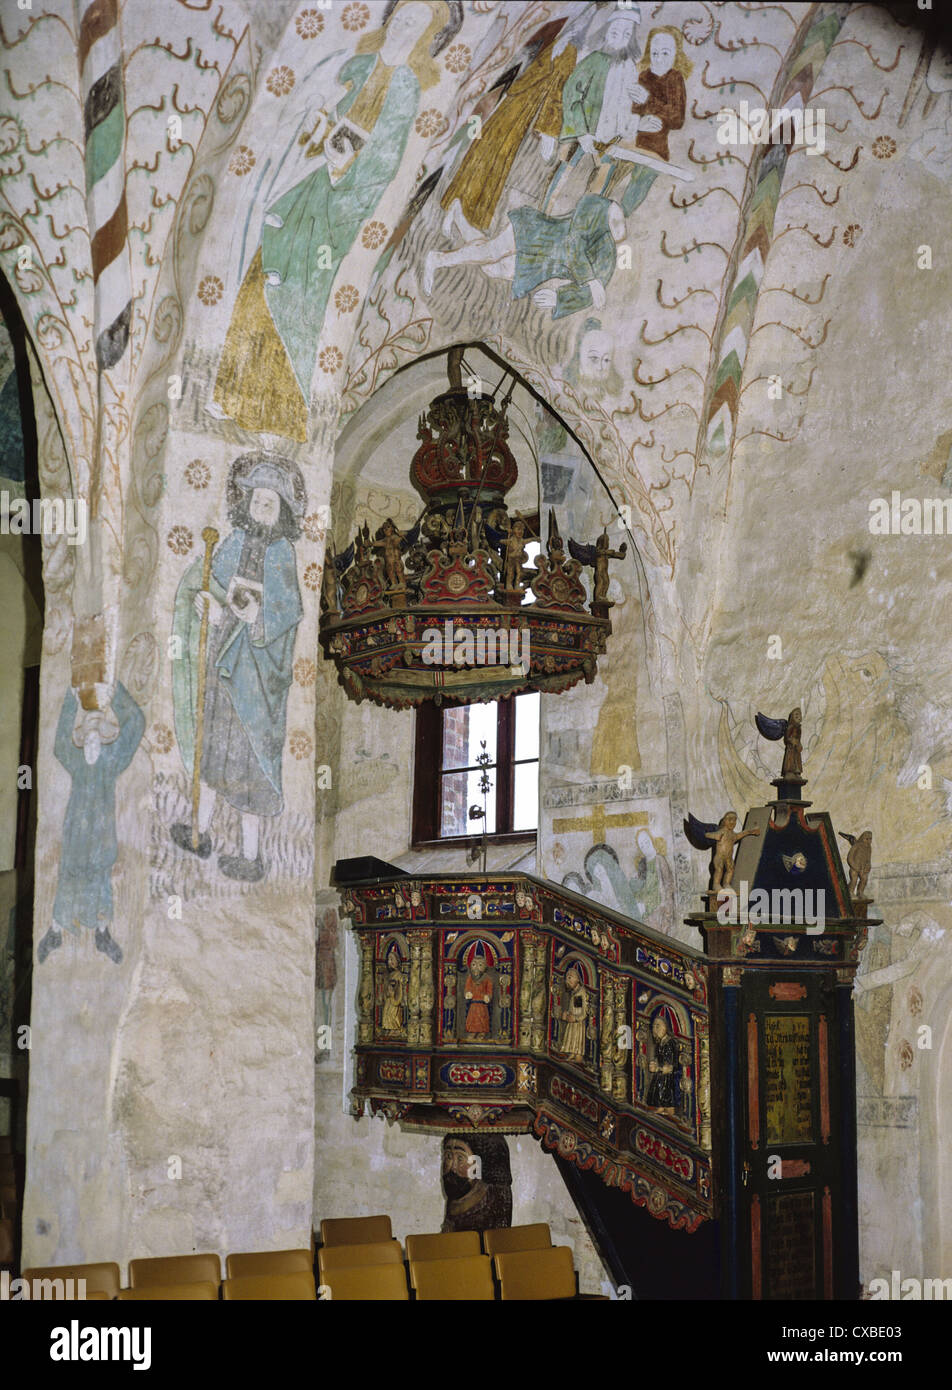 Pulpit and wall murals in the 14th century Church of the Holy Cross, Hattula, Finland Stock Photo